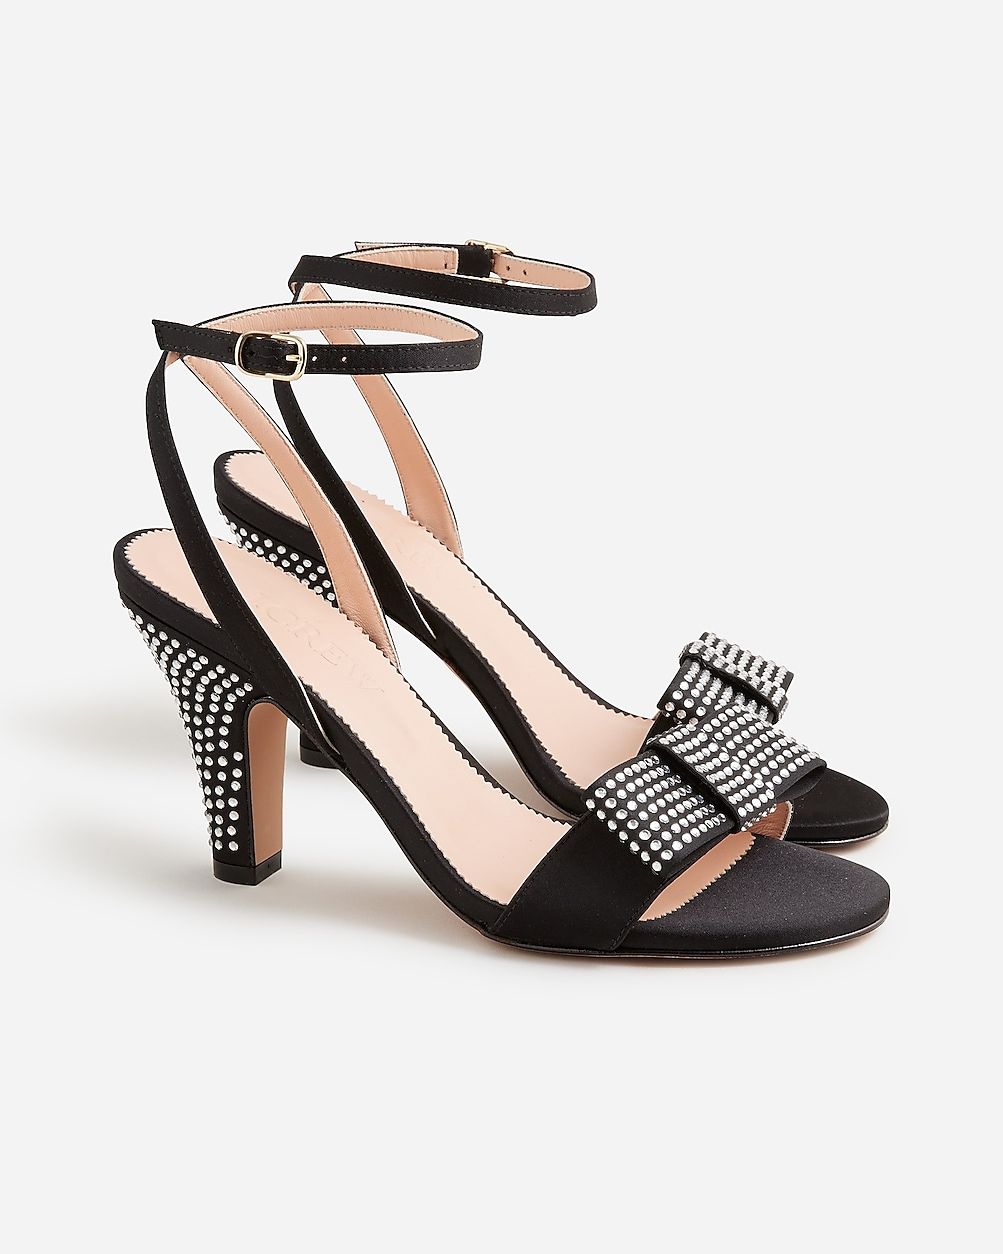 Made-in-Italy crystal bow heels in satin | J.Crew US